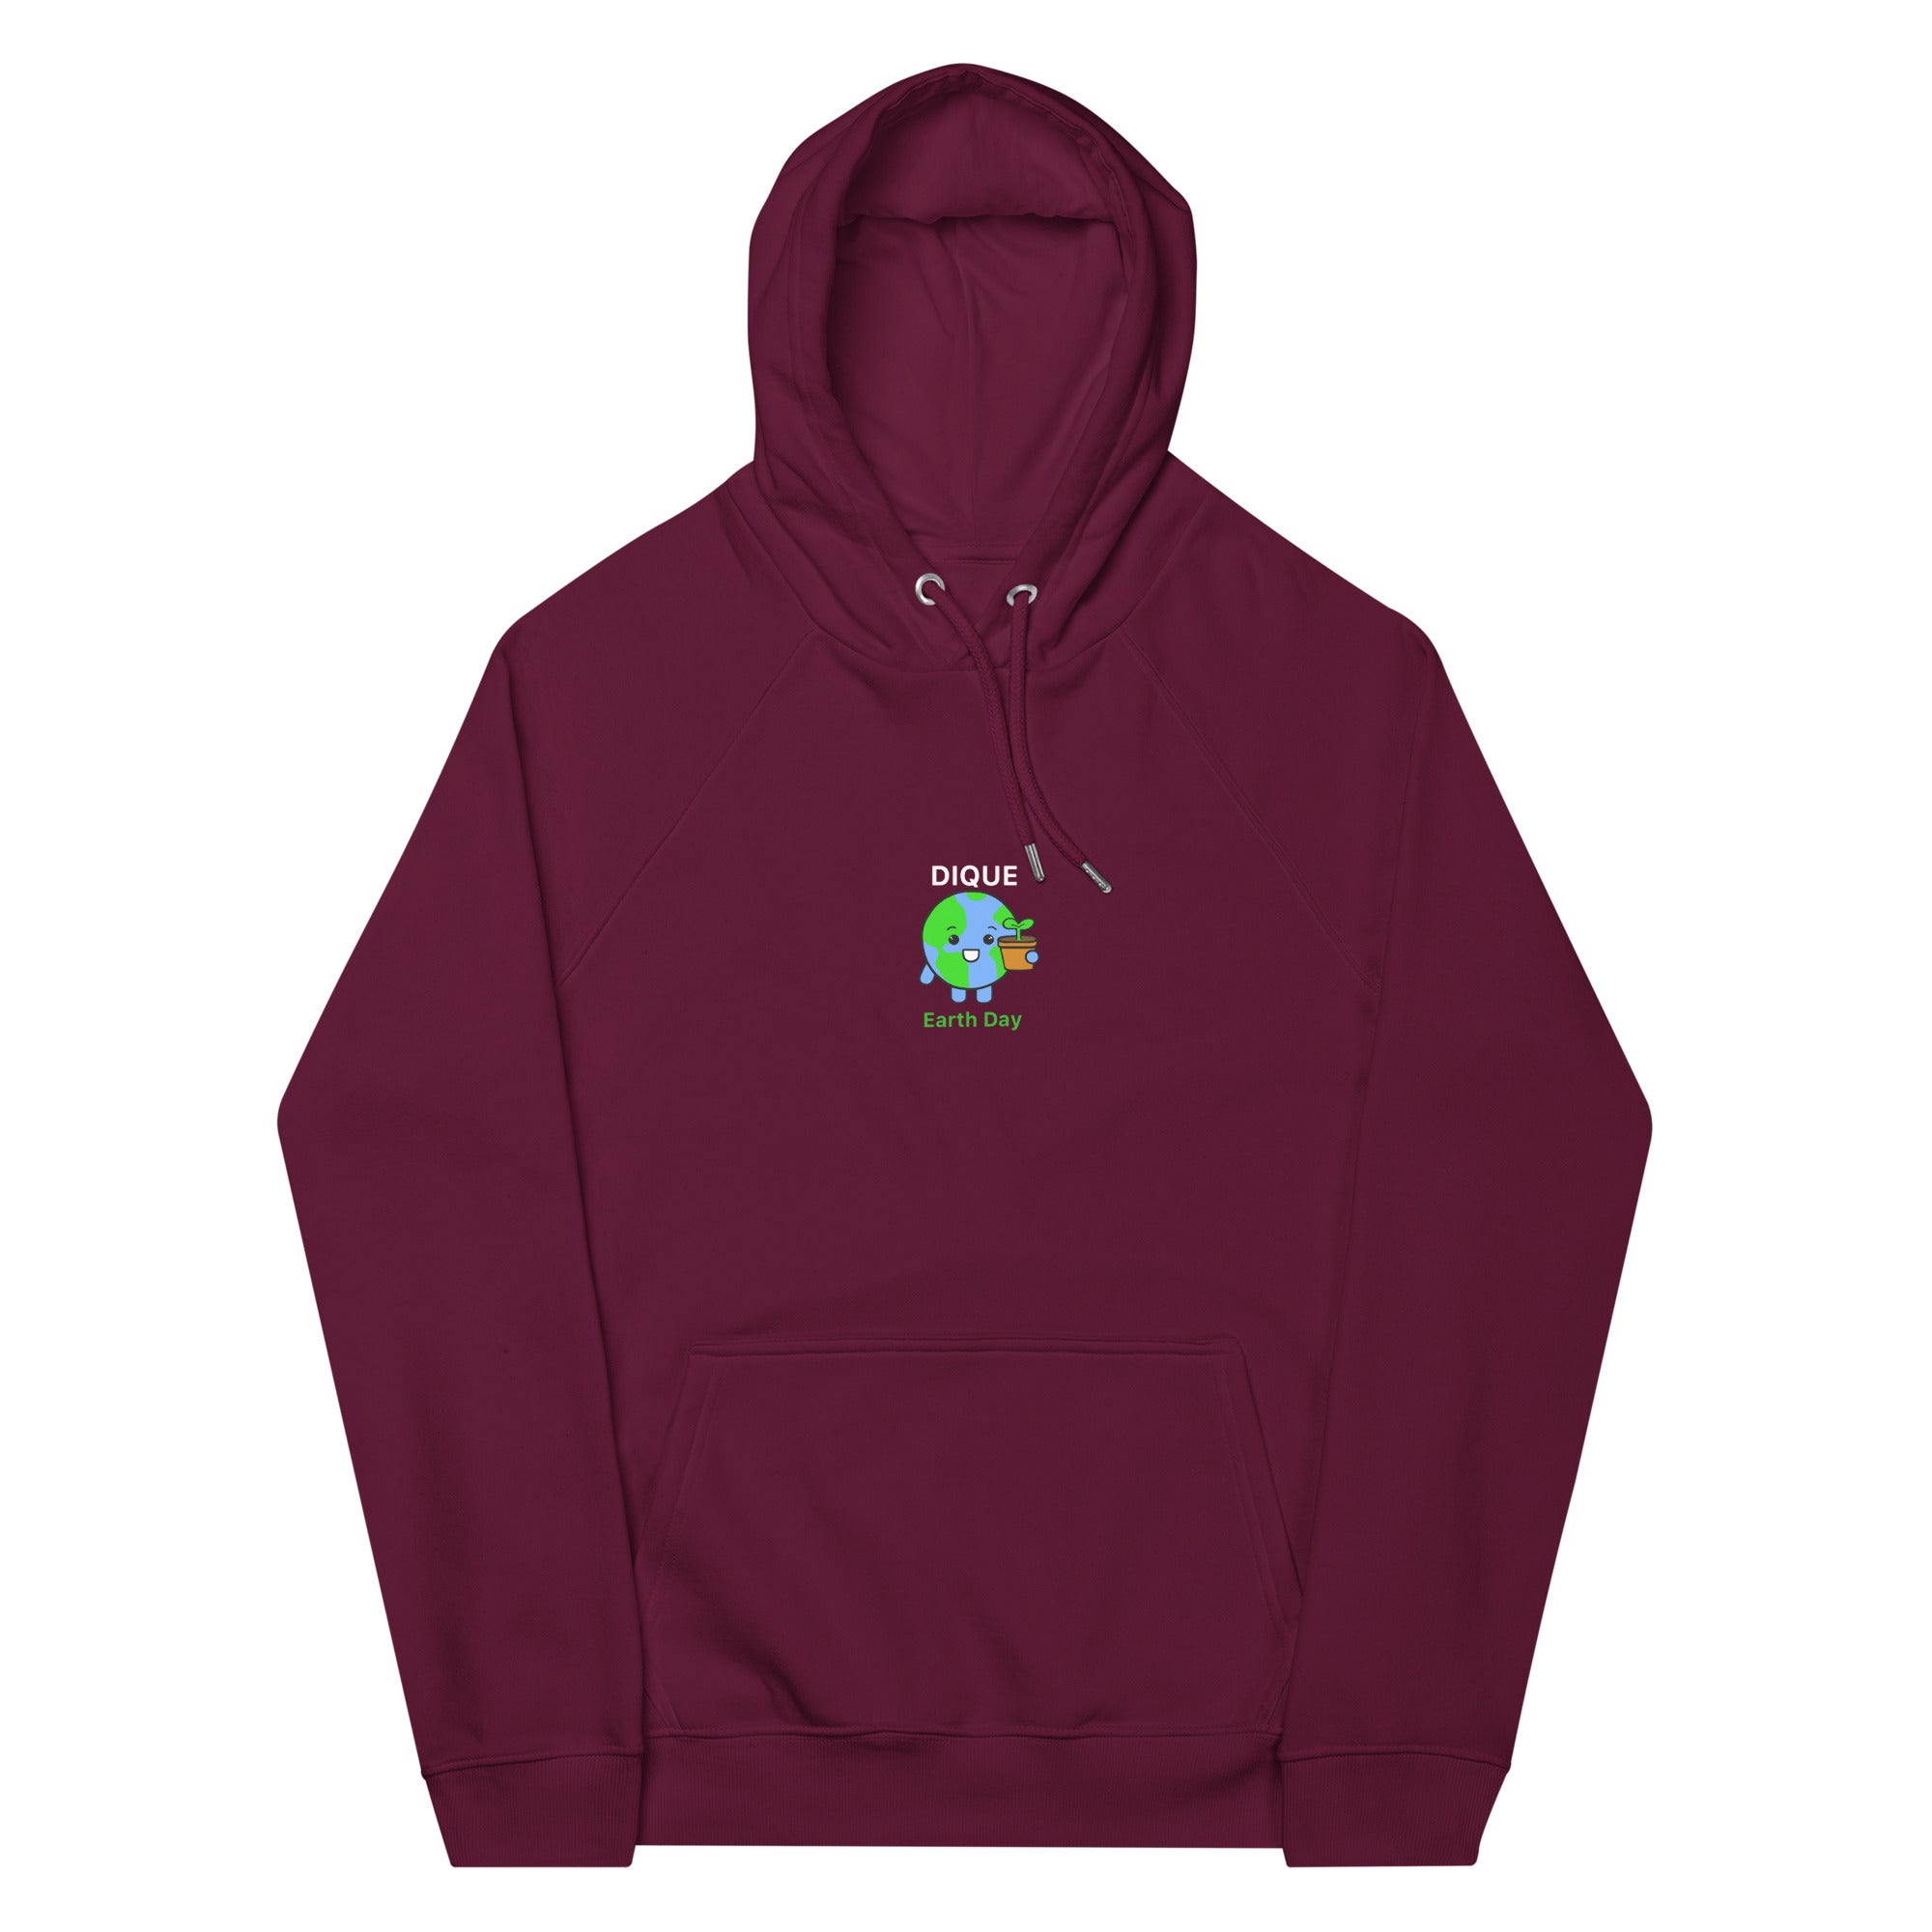 Dique Earth Day Unisex Organic Hoodie